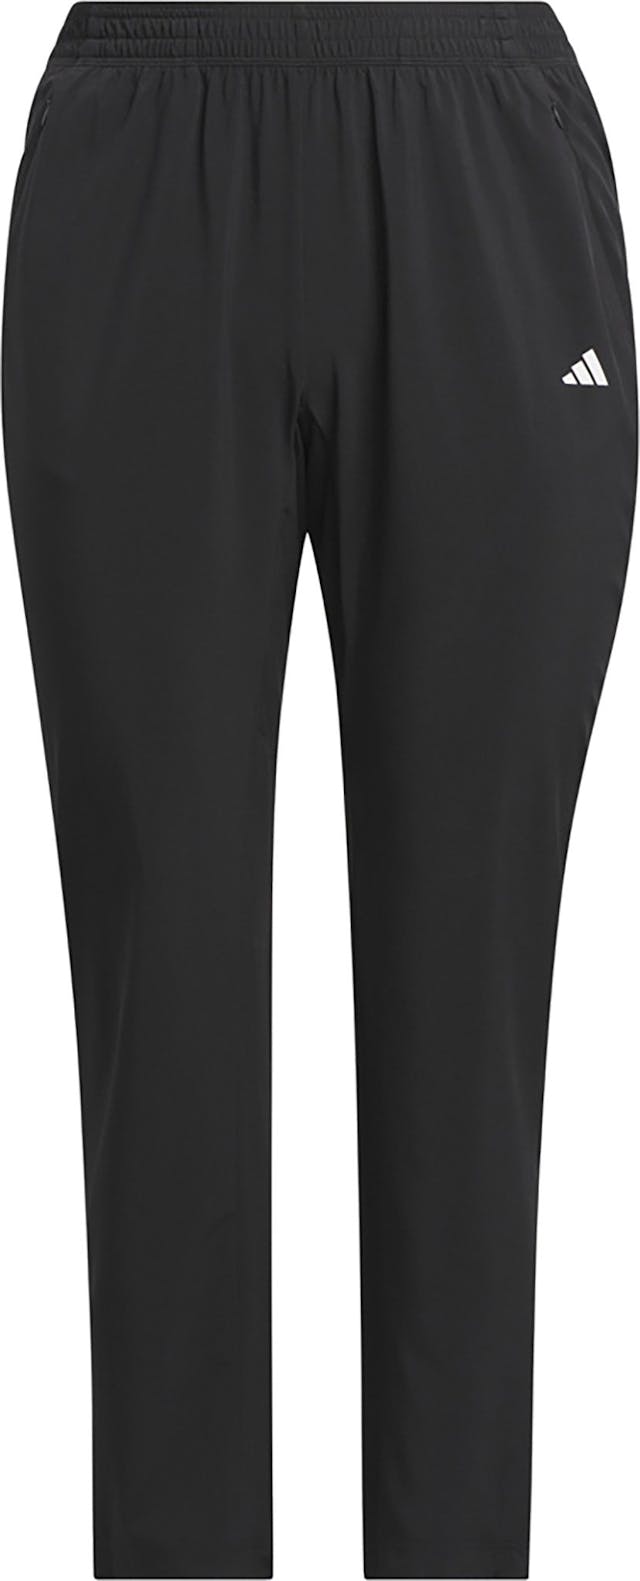 Product image for True Move Plus Size Training Pant - Women's